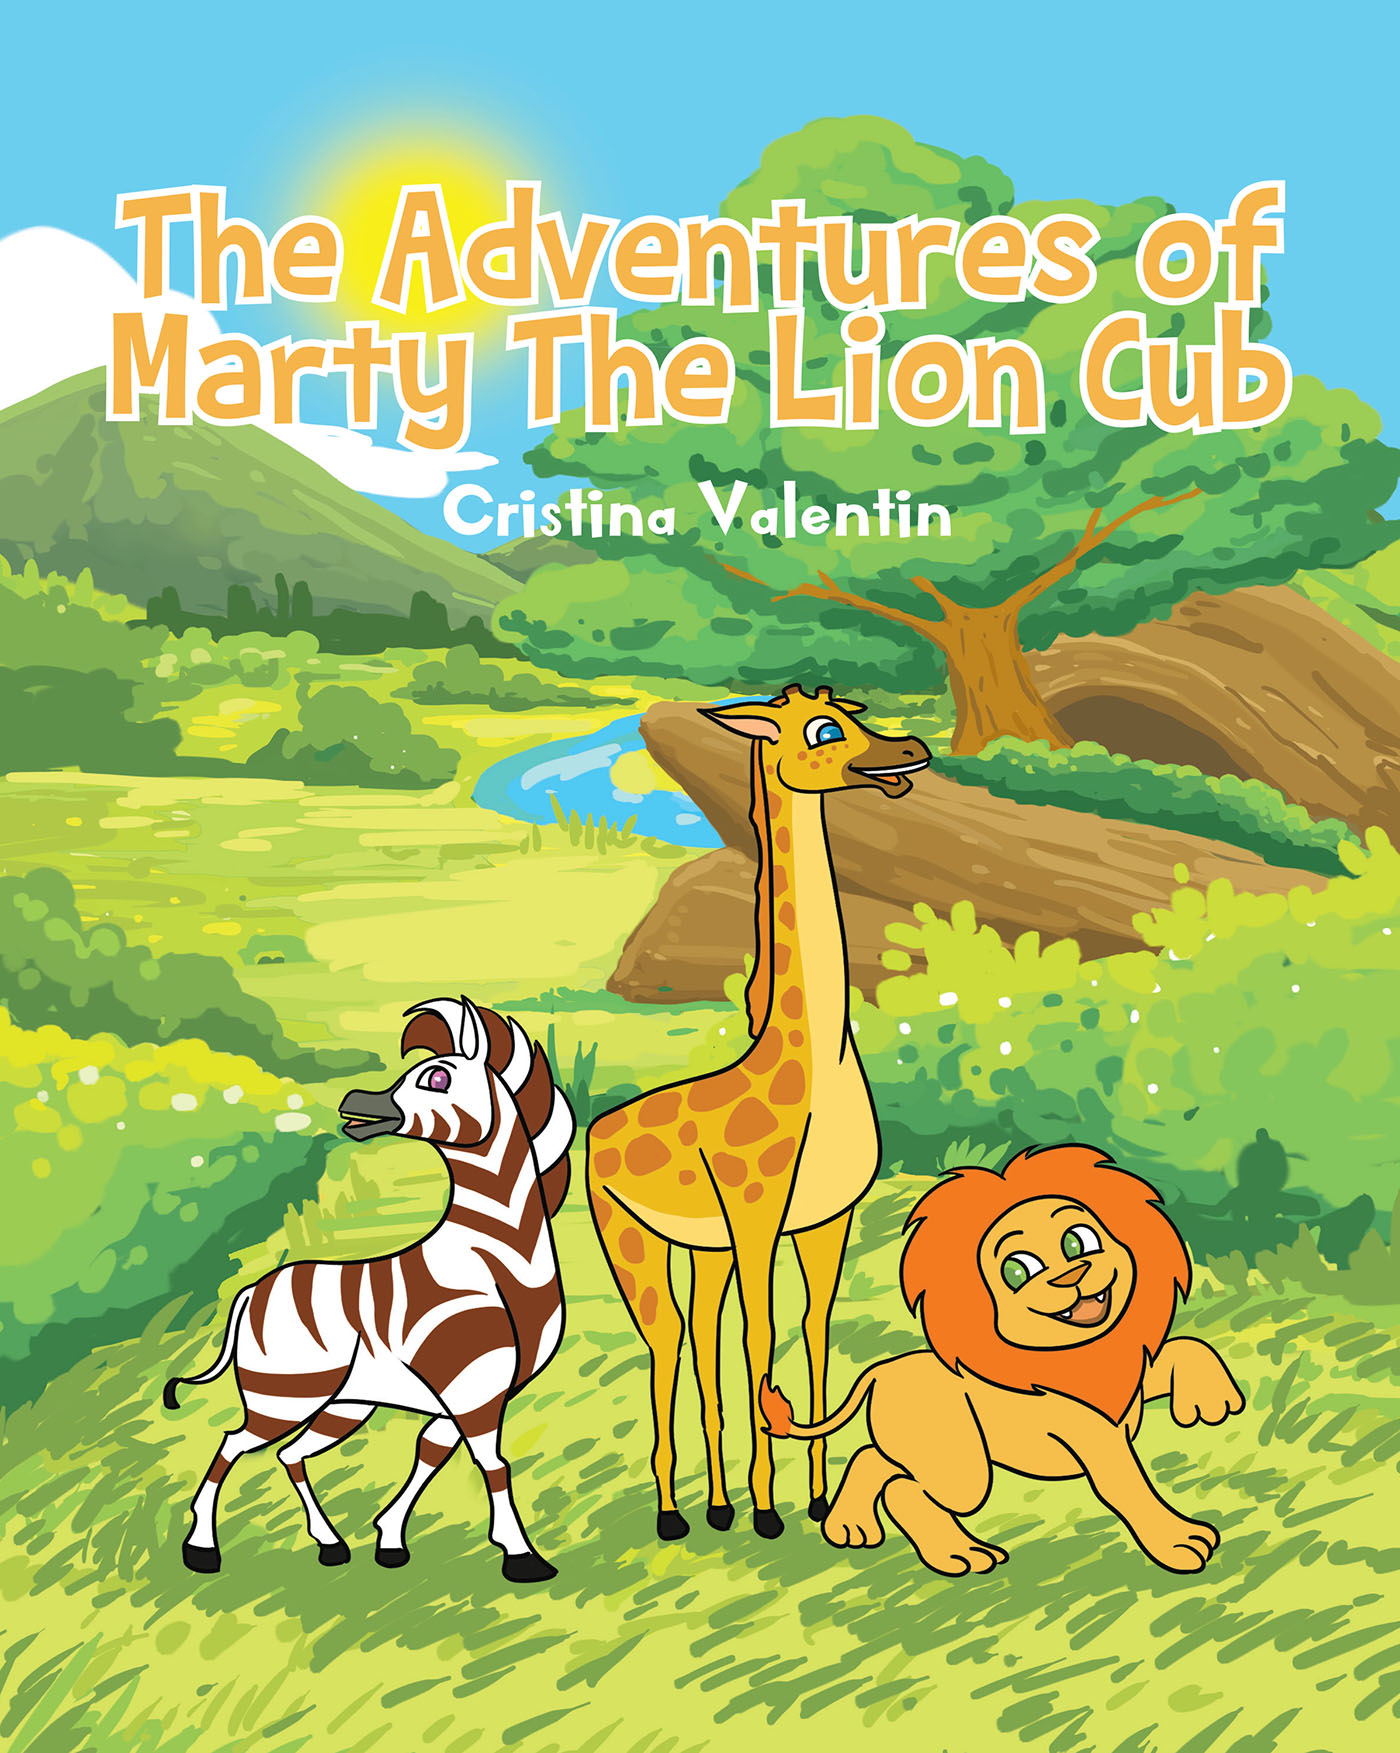 Cristina Valentin’s New Book, "The Adventures of Marty the Lion Cub," Follows a Lion Cub and His Two Friends as They Investigate Mysterious Noises They Hear at the Creek